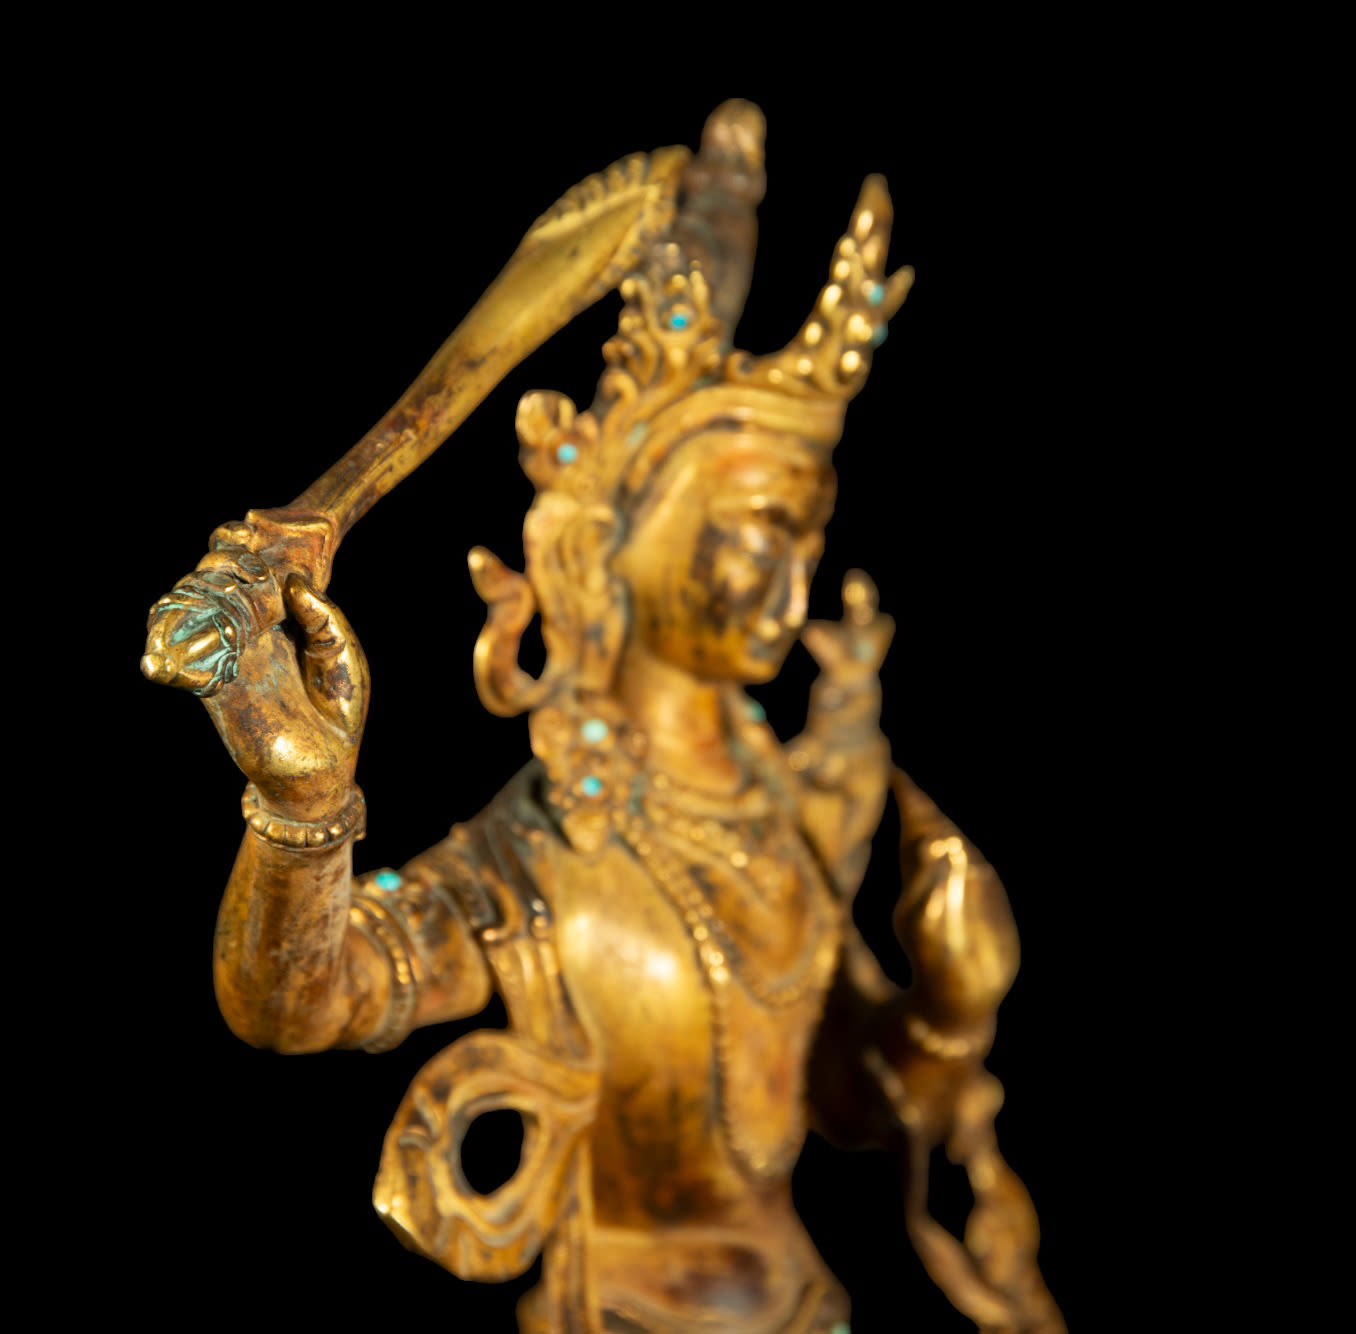 Exquisite Goddess Tara in gilt repoussé copper, Chinese school, Tibet, 19th century - Image 5 of 8